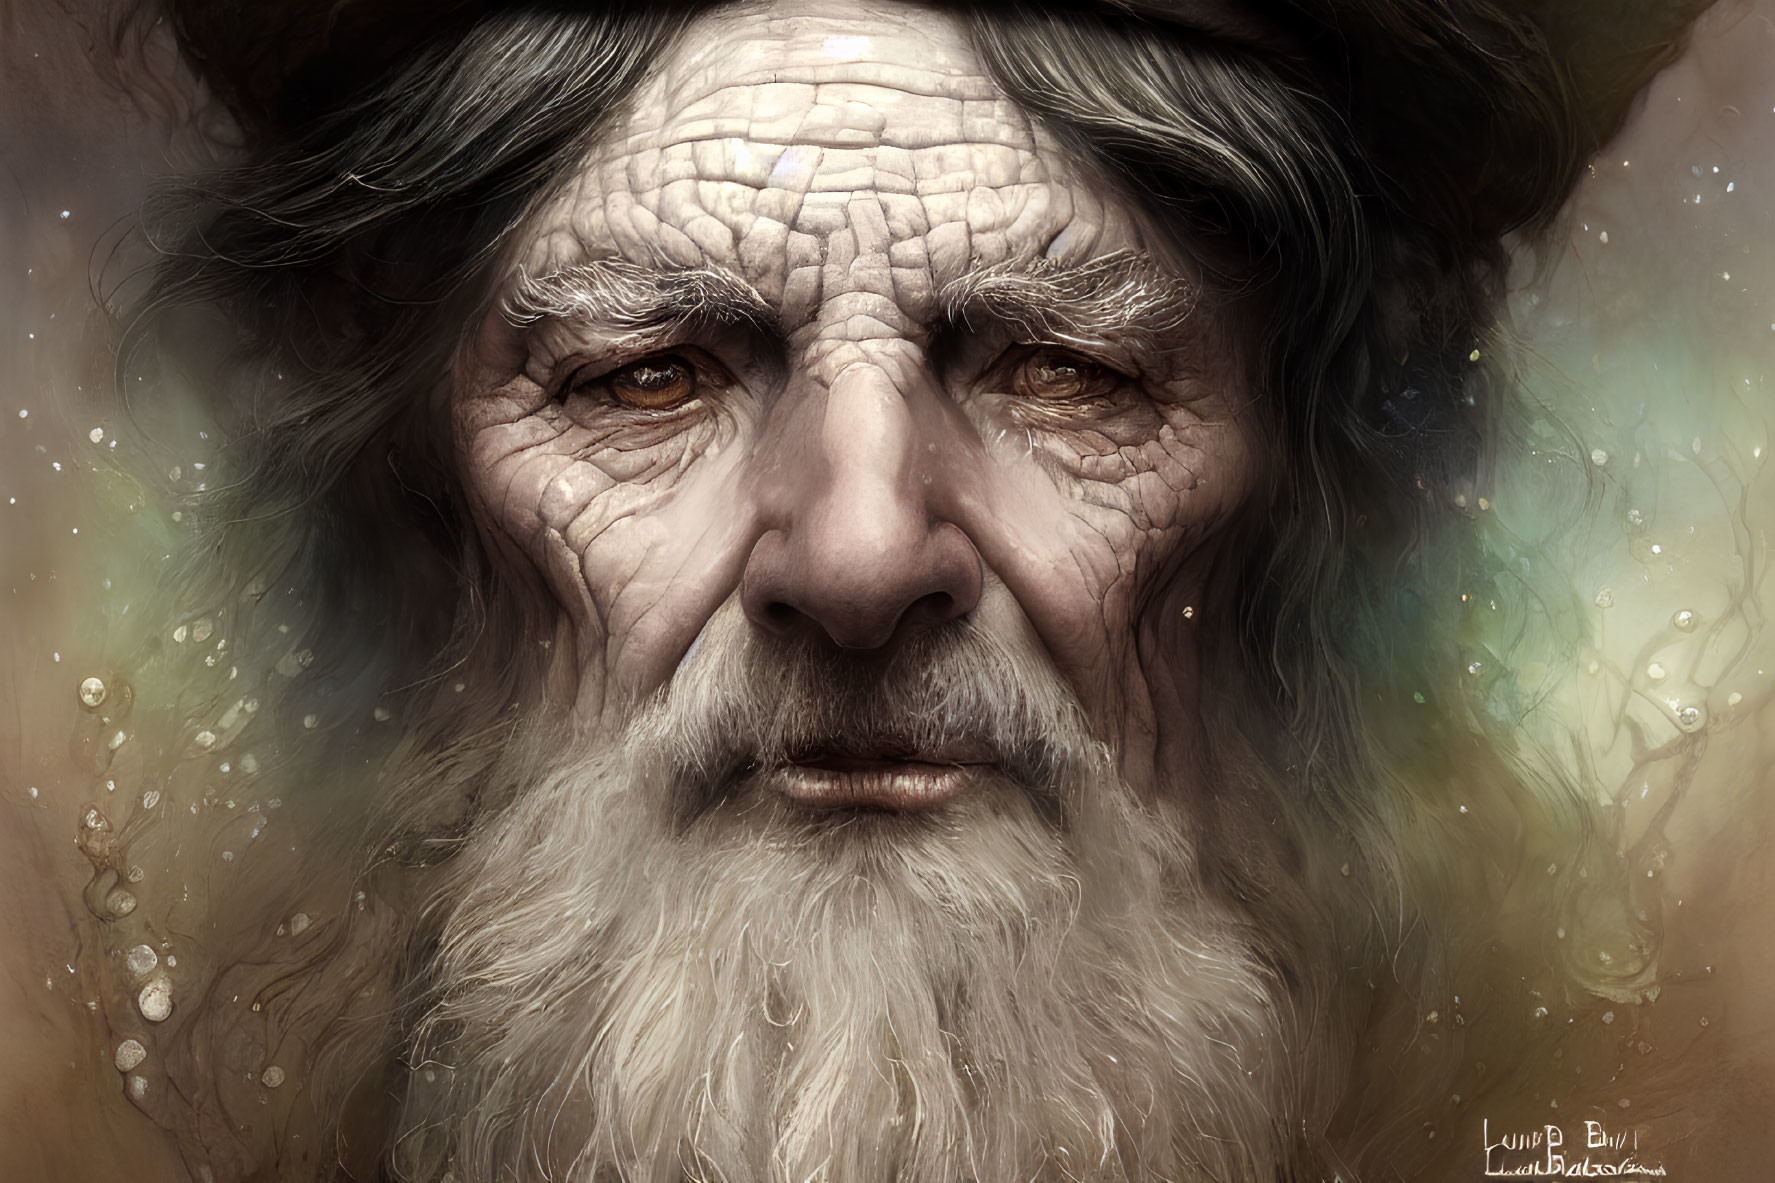 Elderly man with deep wrinkles and hat in mystical setting